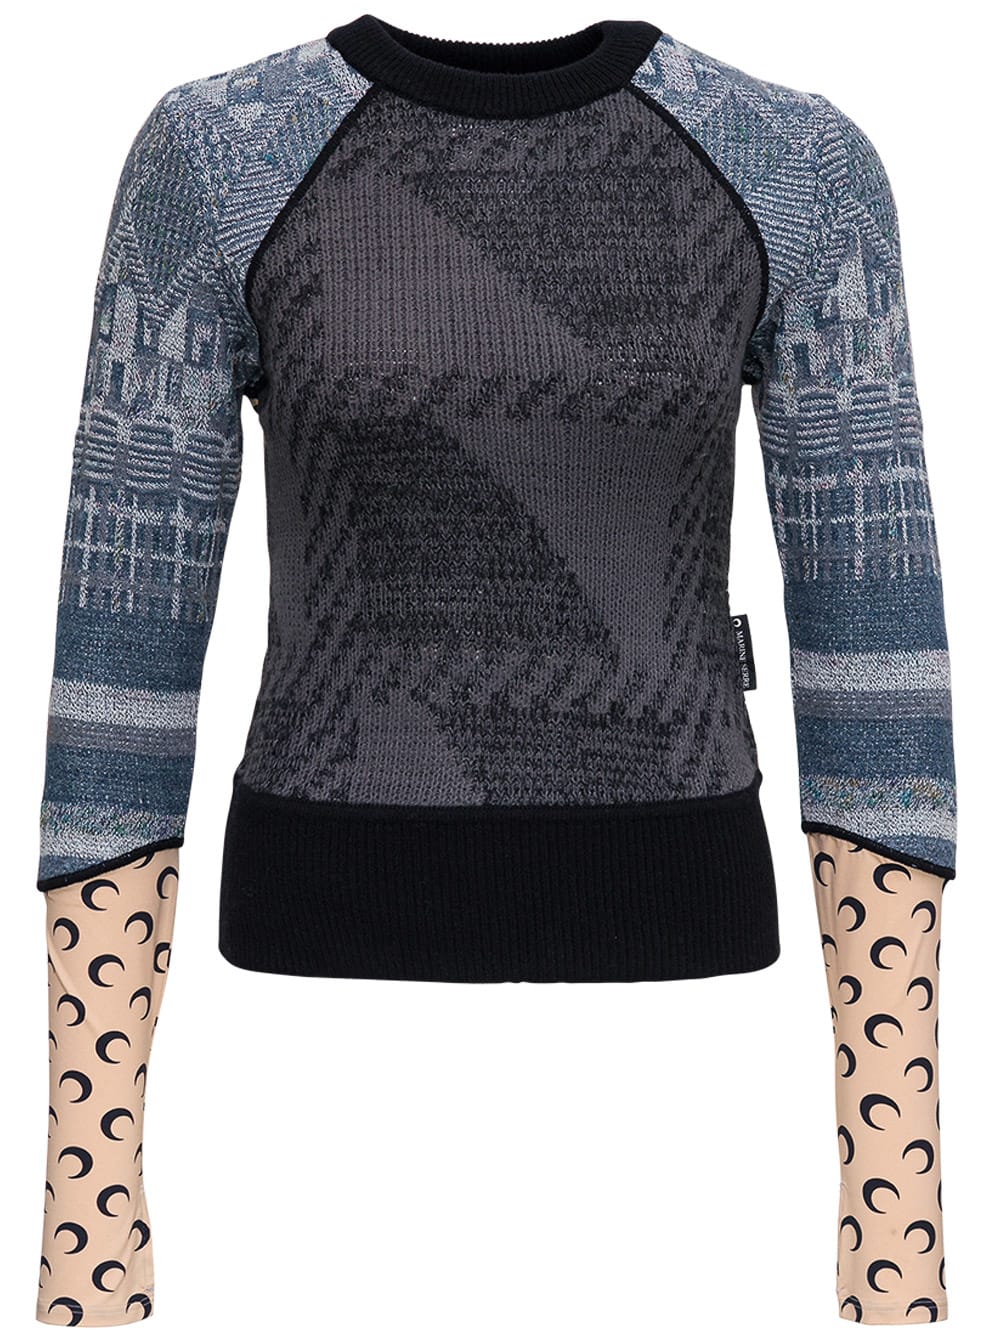 Marine Serre Mix Of Materials Long-sleeved Sweater